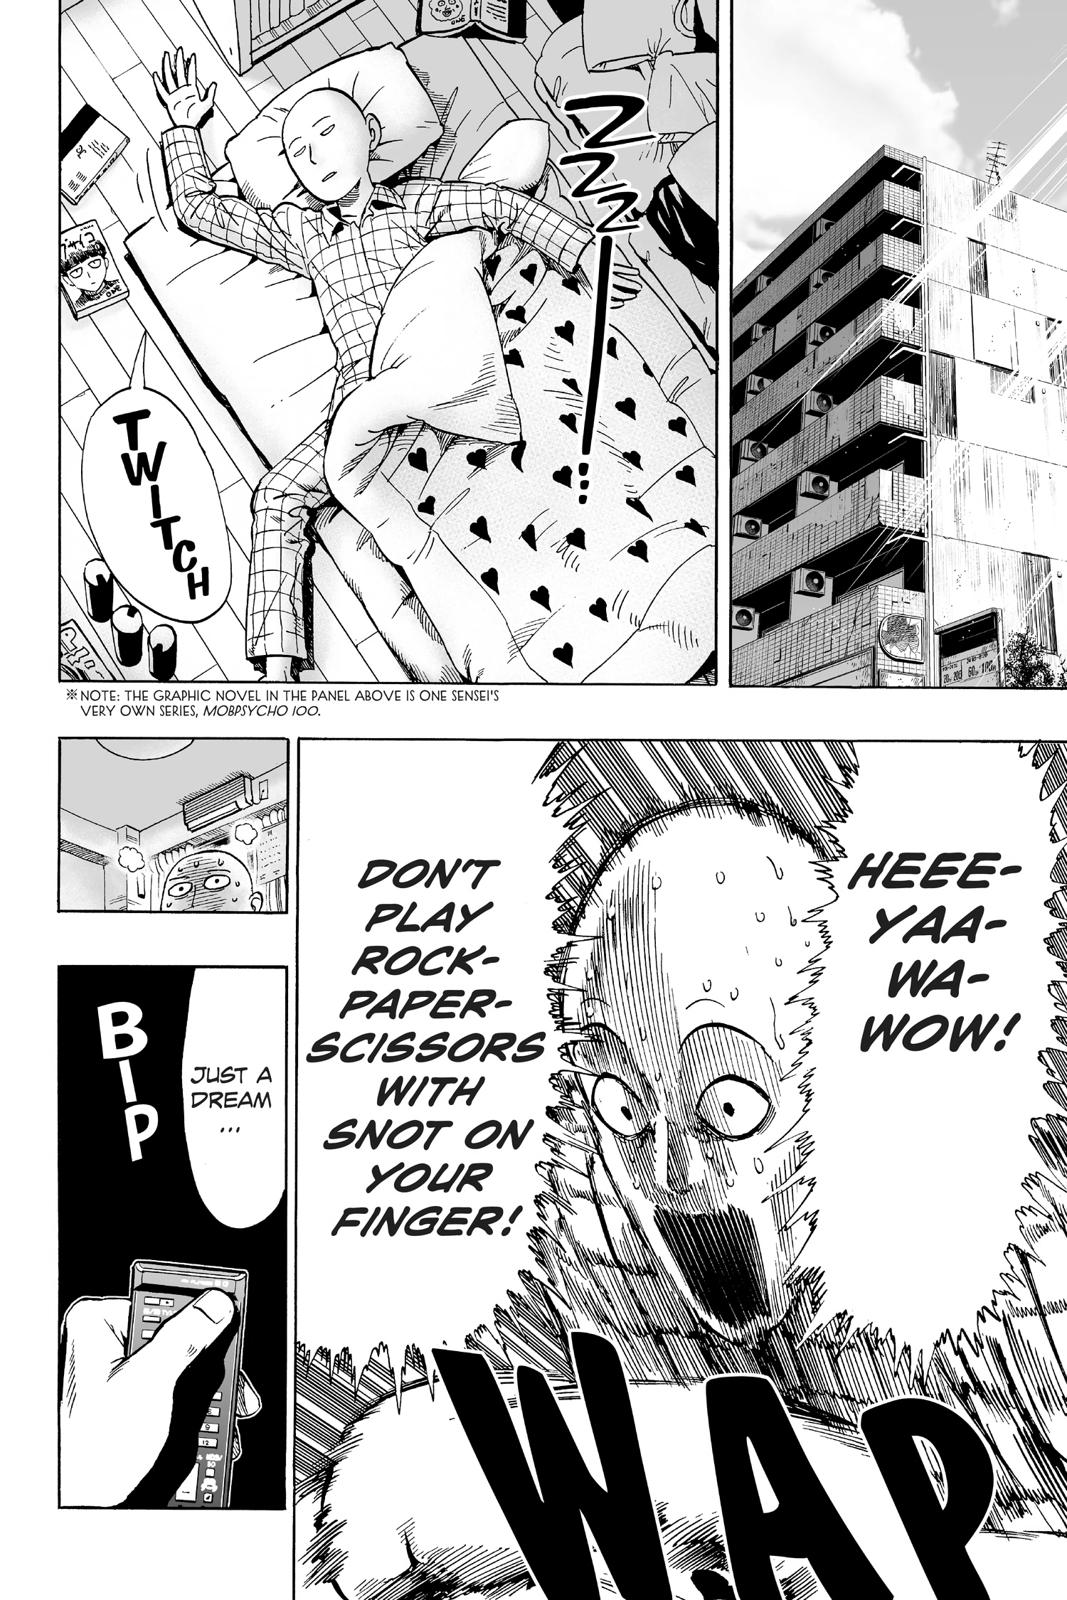 One-Punch Man, Punch 12 image 10